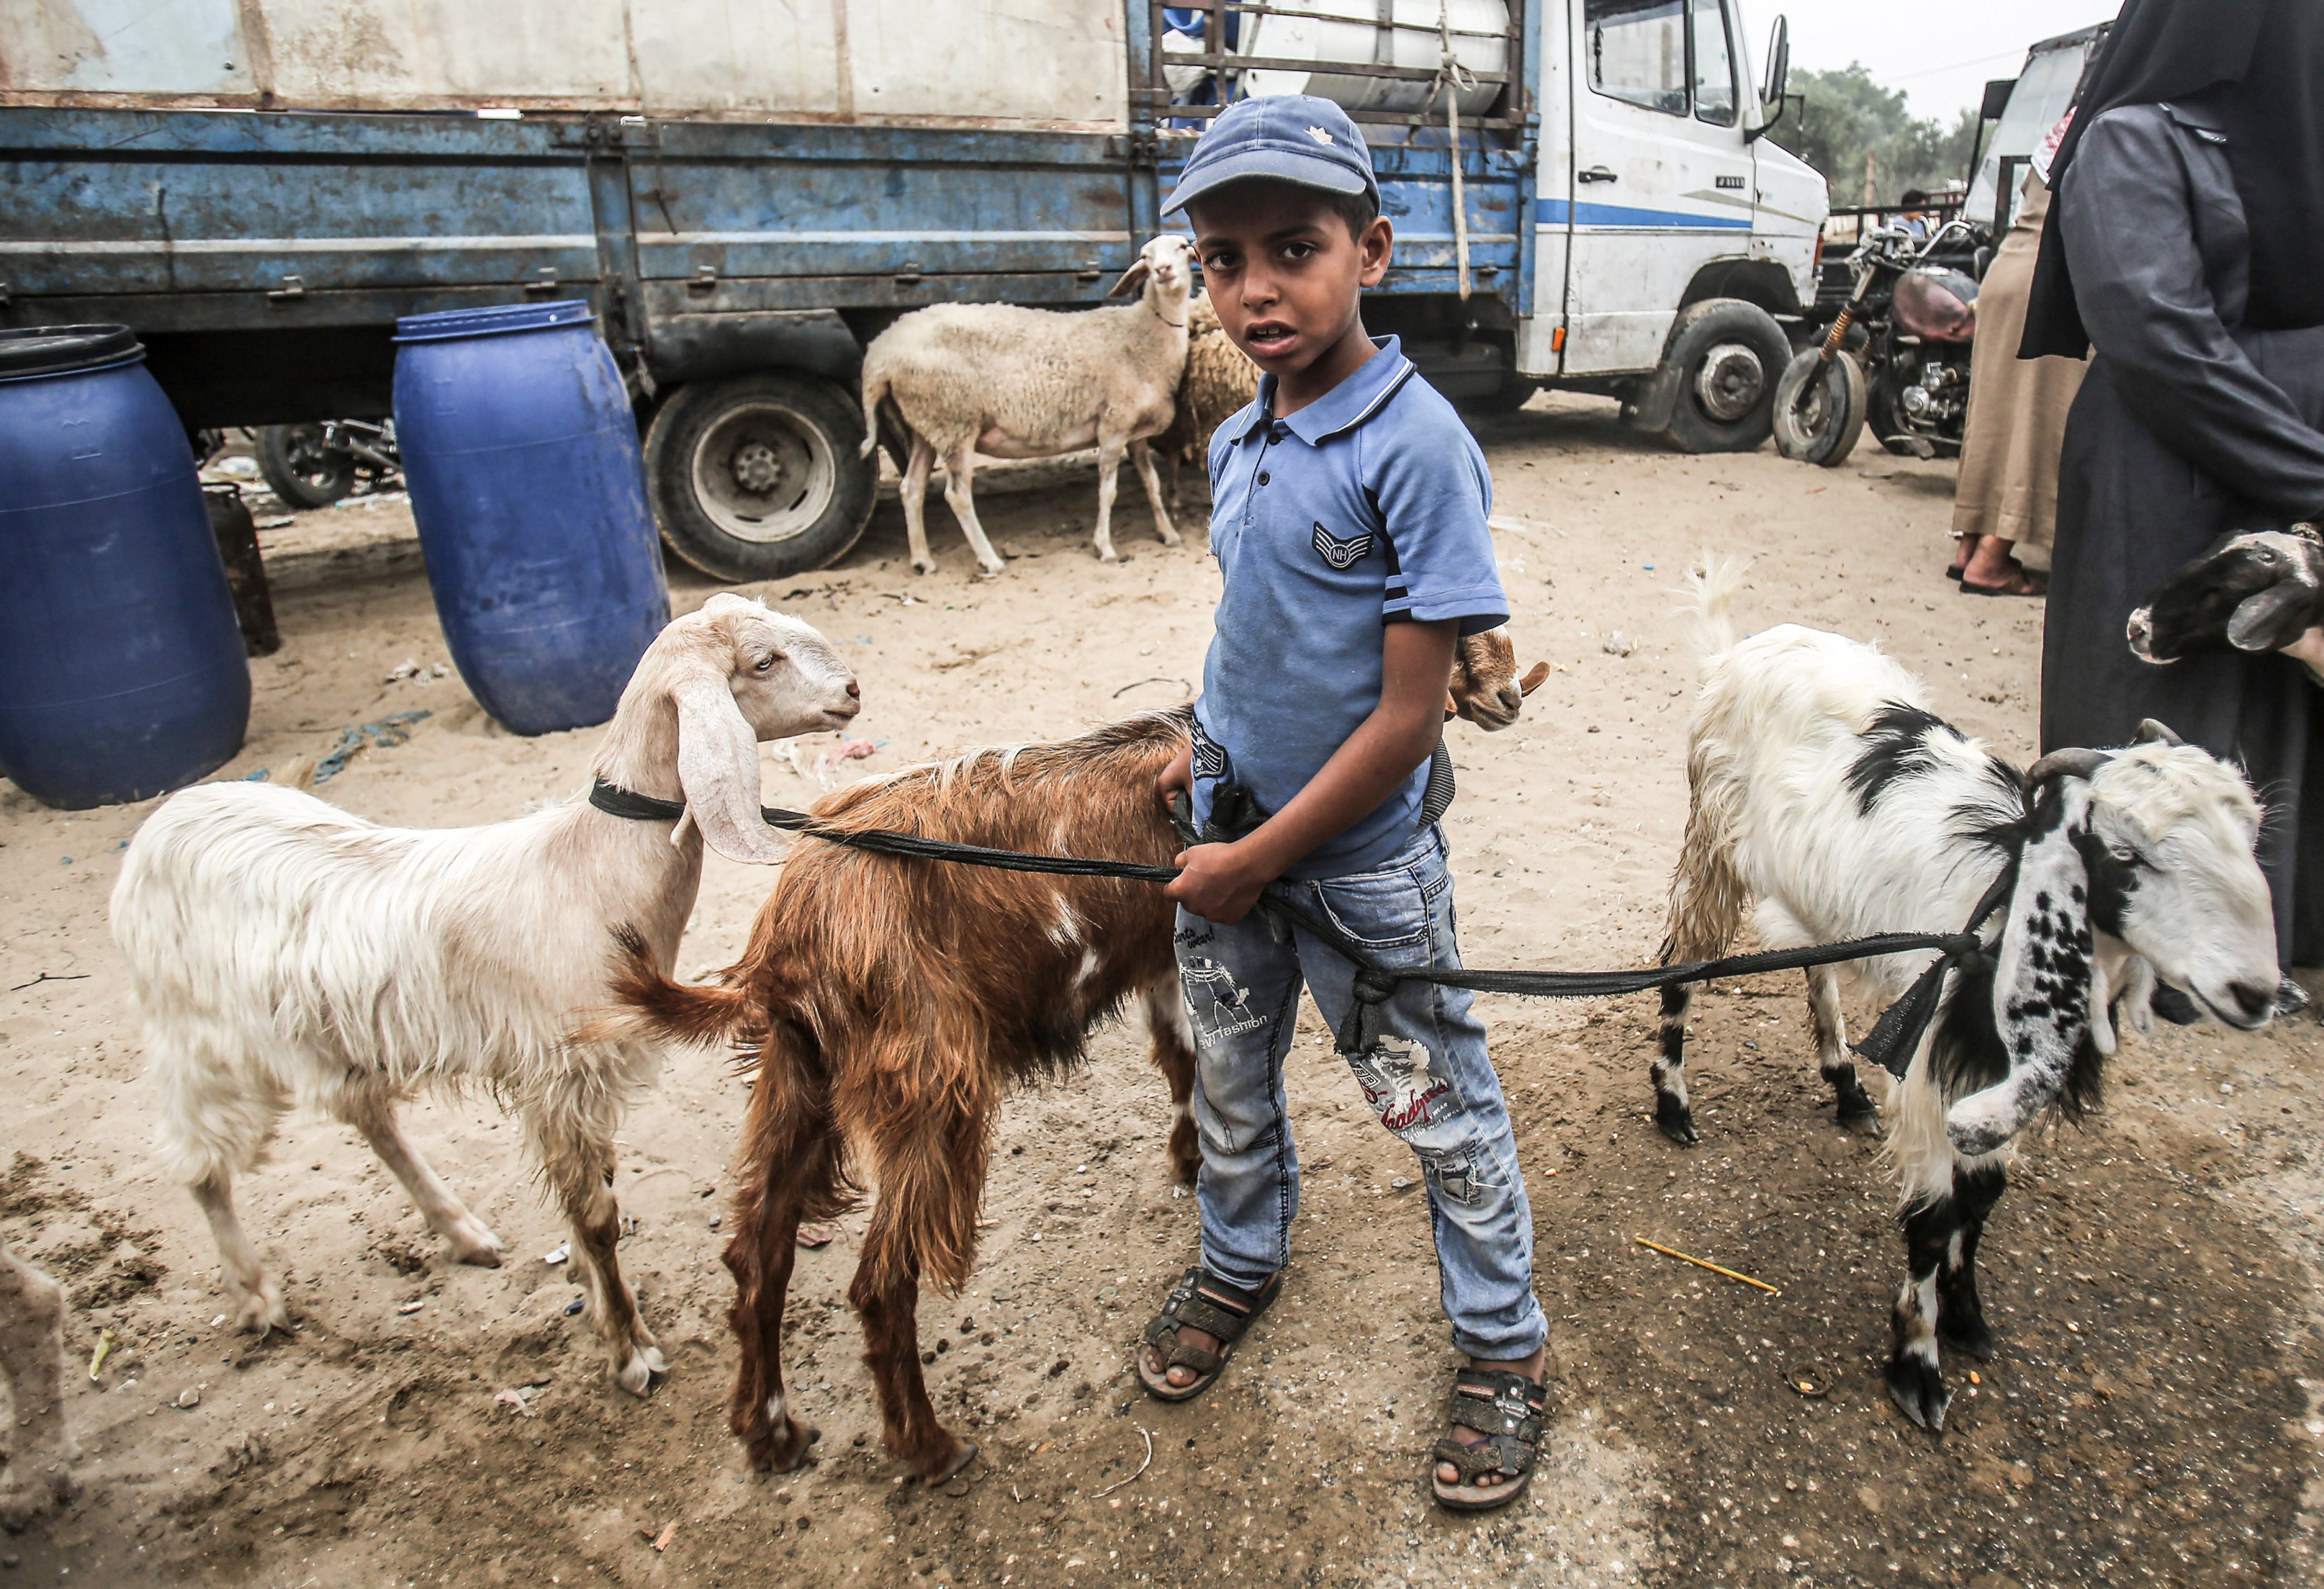 A Palestinian child surrounded by sheep at a livestock